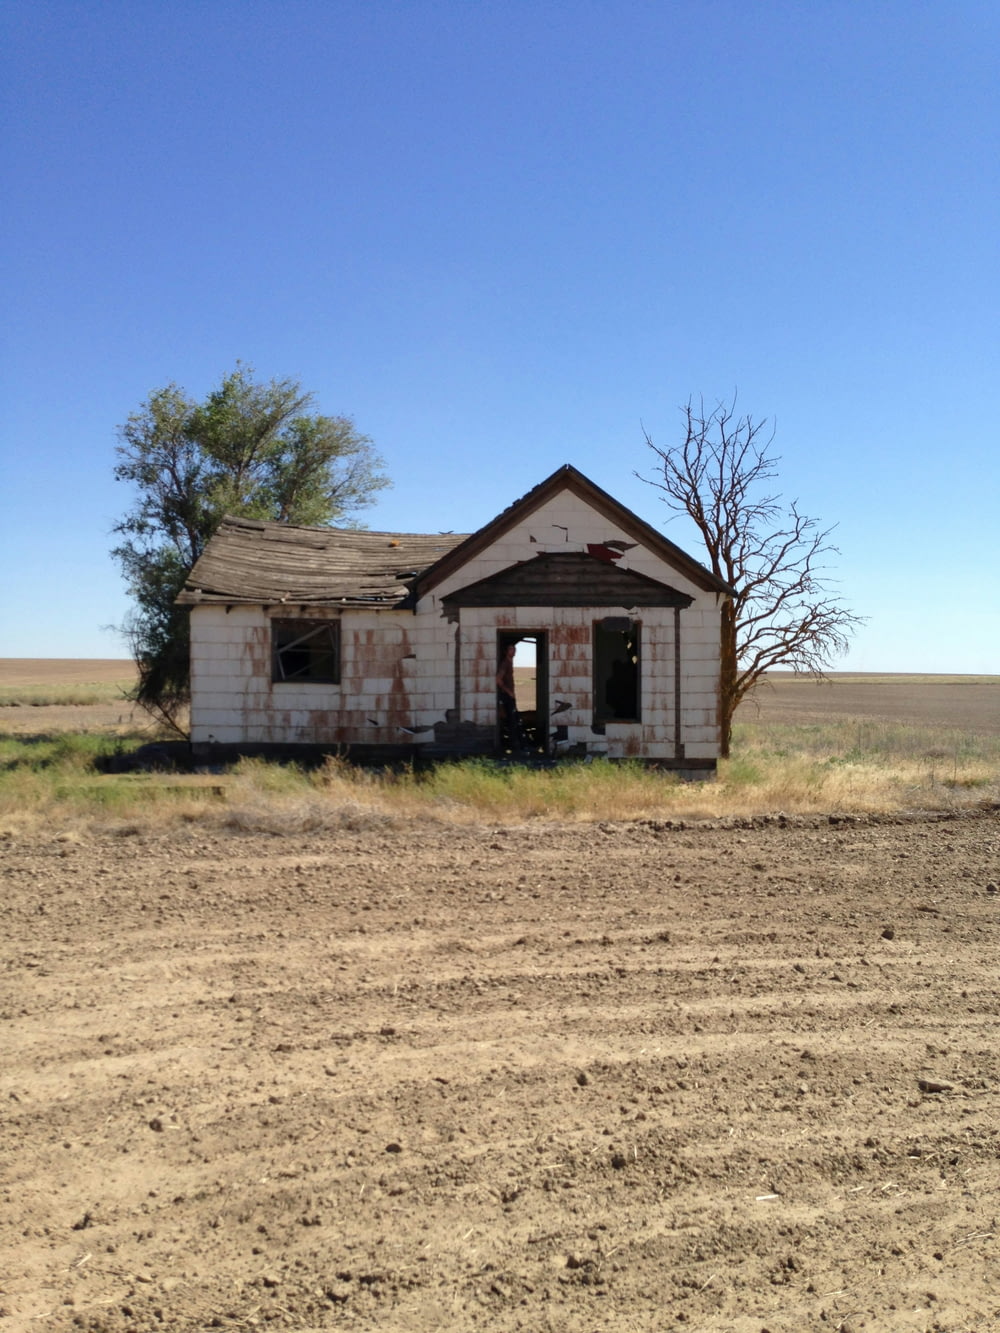 an old run down house in the middle of nowhere